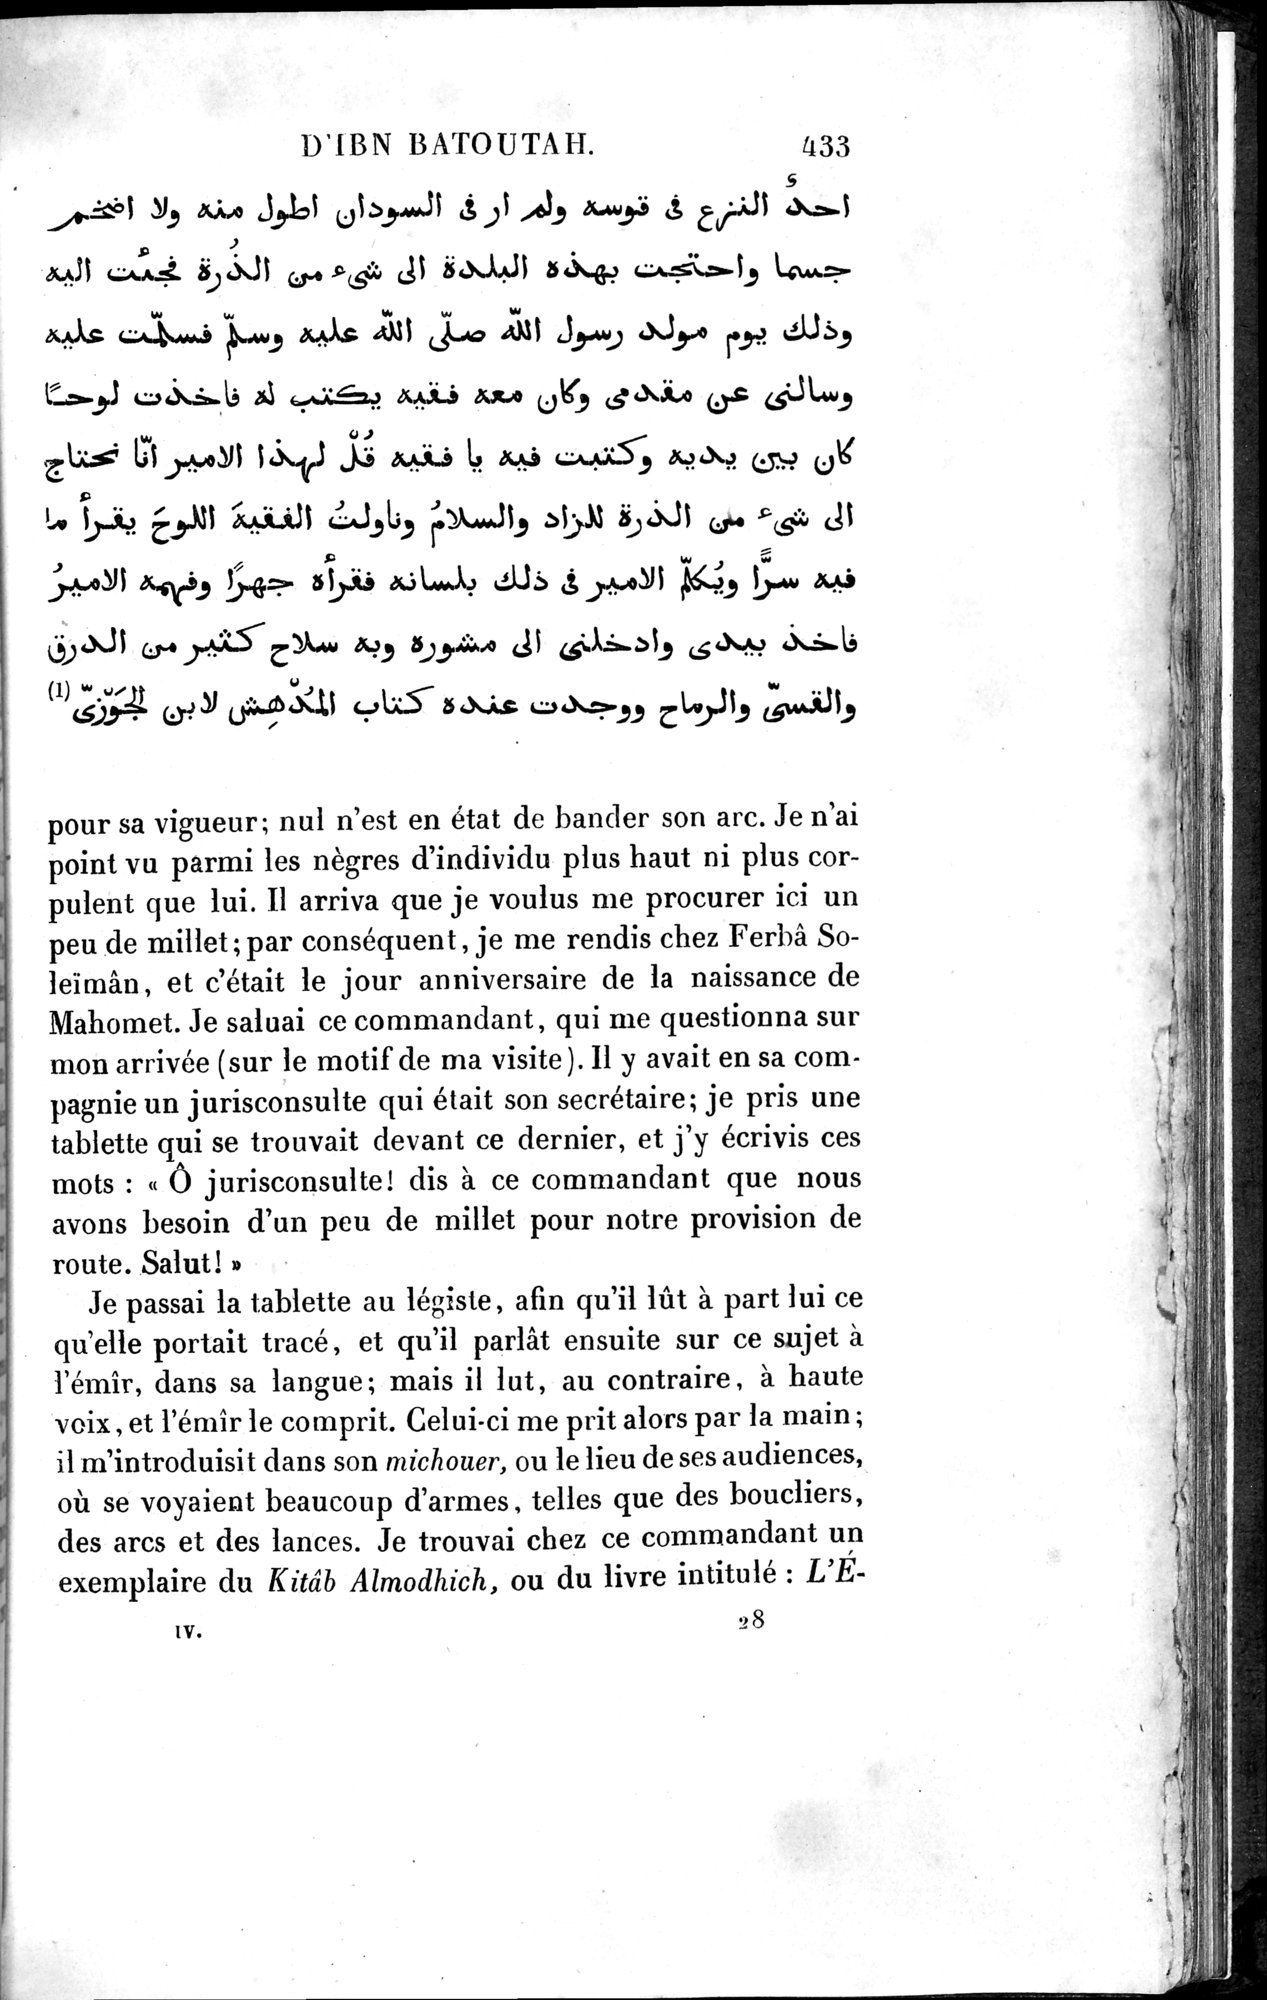 Voyages d'Ibn Batoutah : vol.4 / Page 445 (Grayscale High Resolution Image)